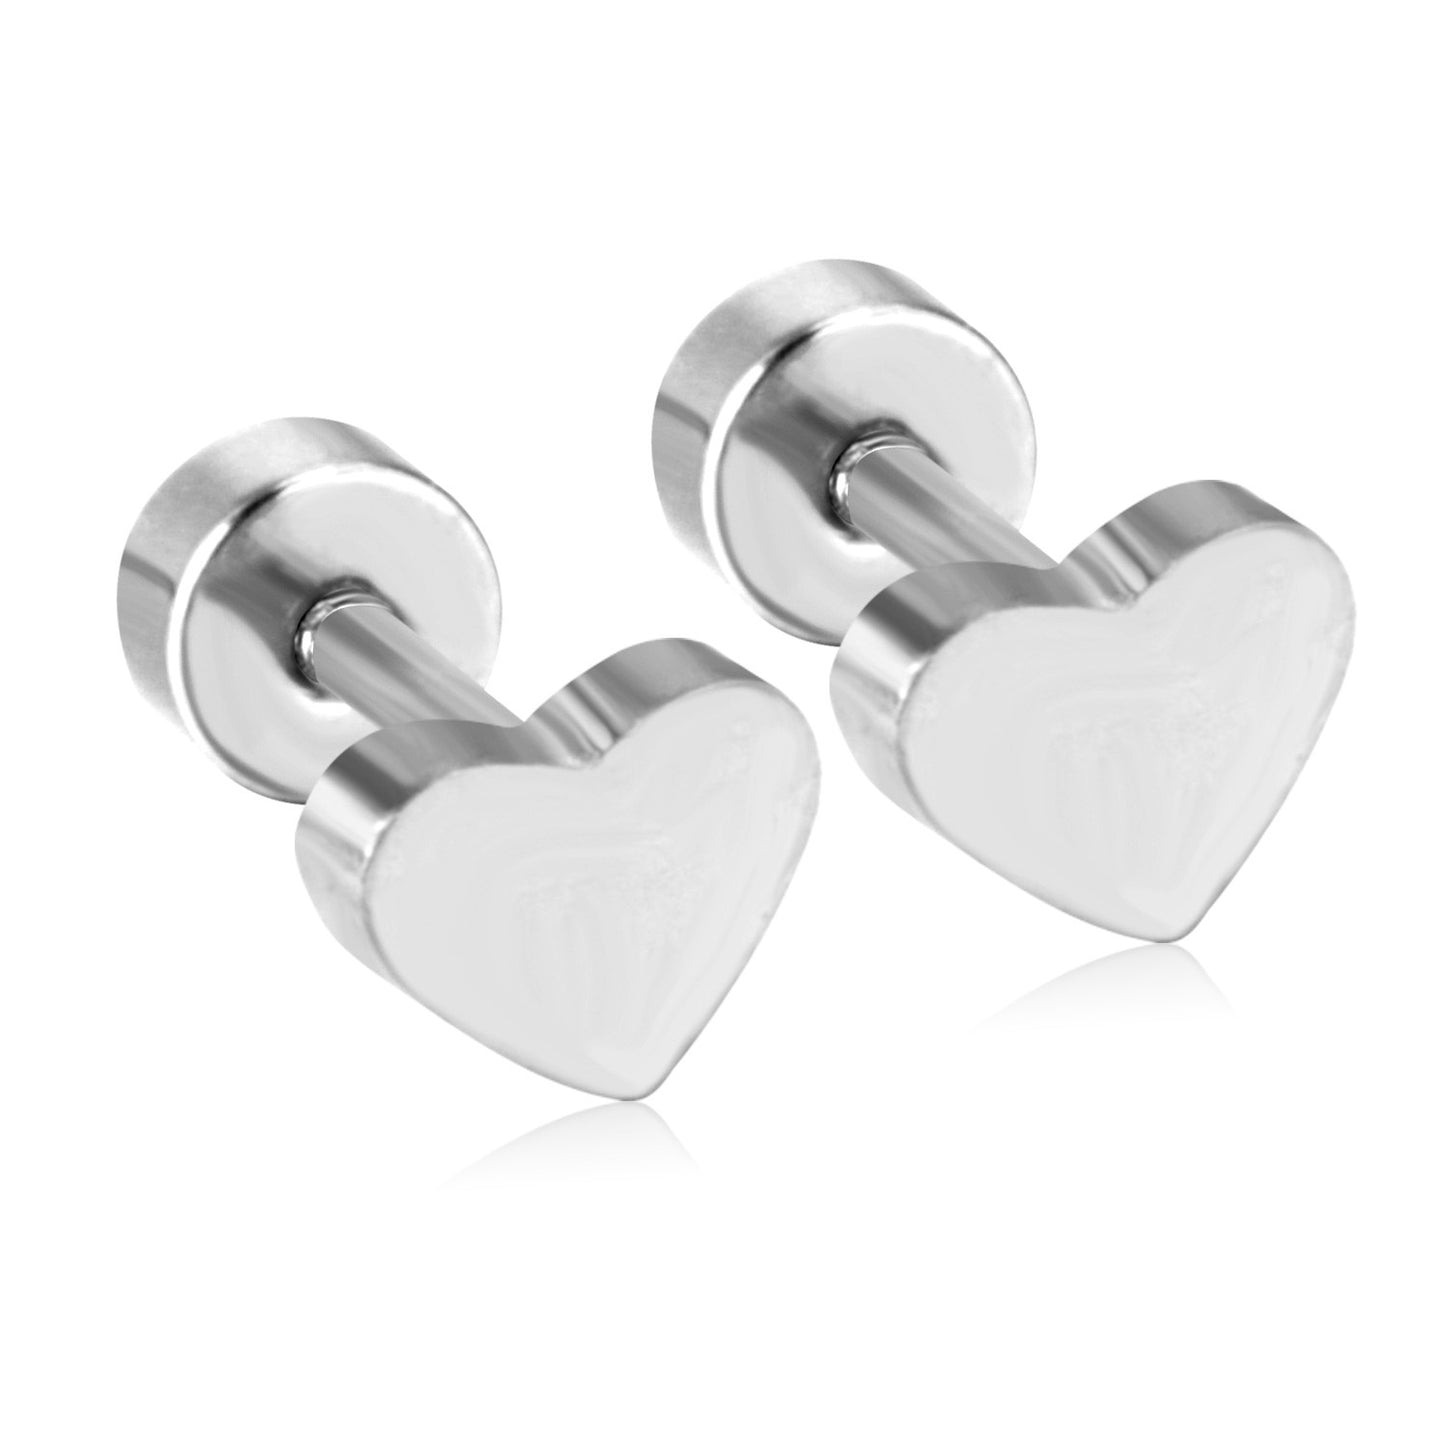 Children's Earrings:  Surgical Steel, Gold IP, Polished Hearts with Screw Backs